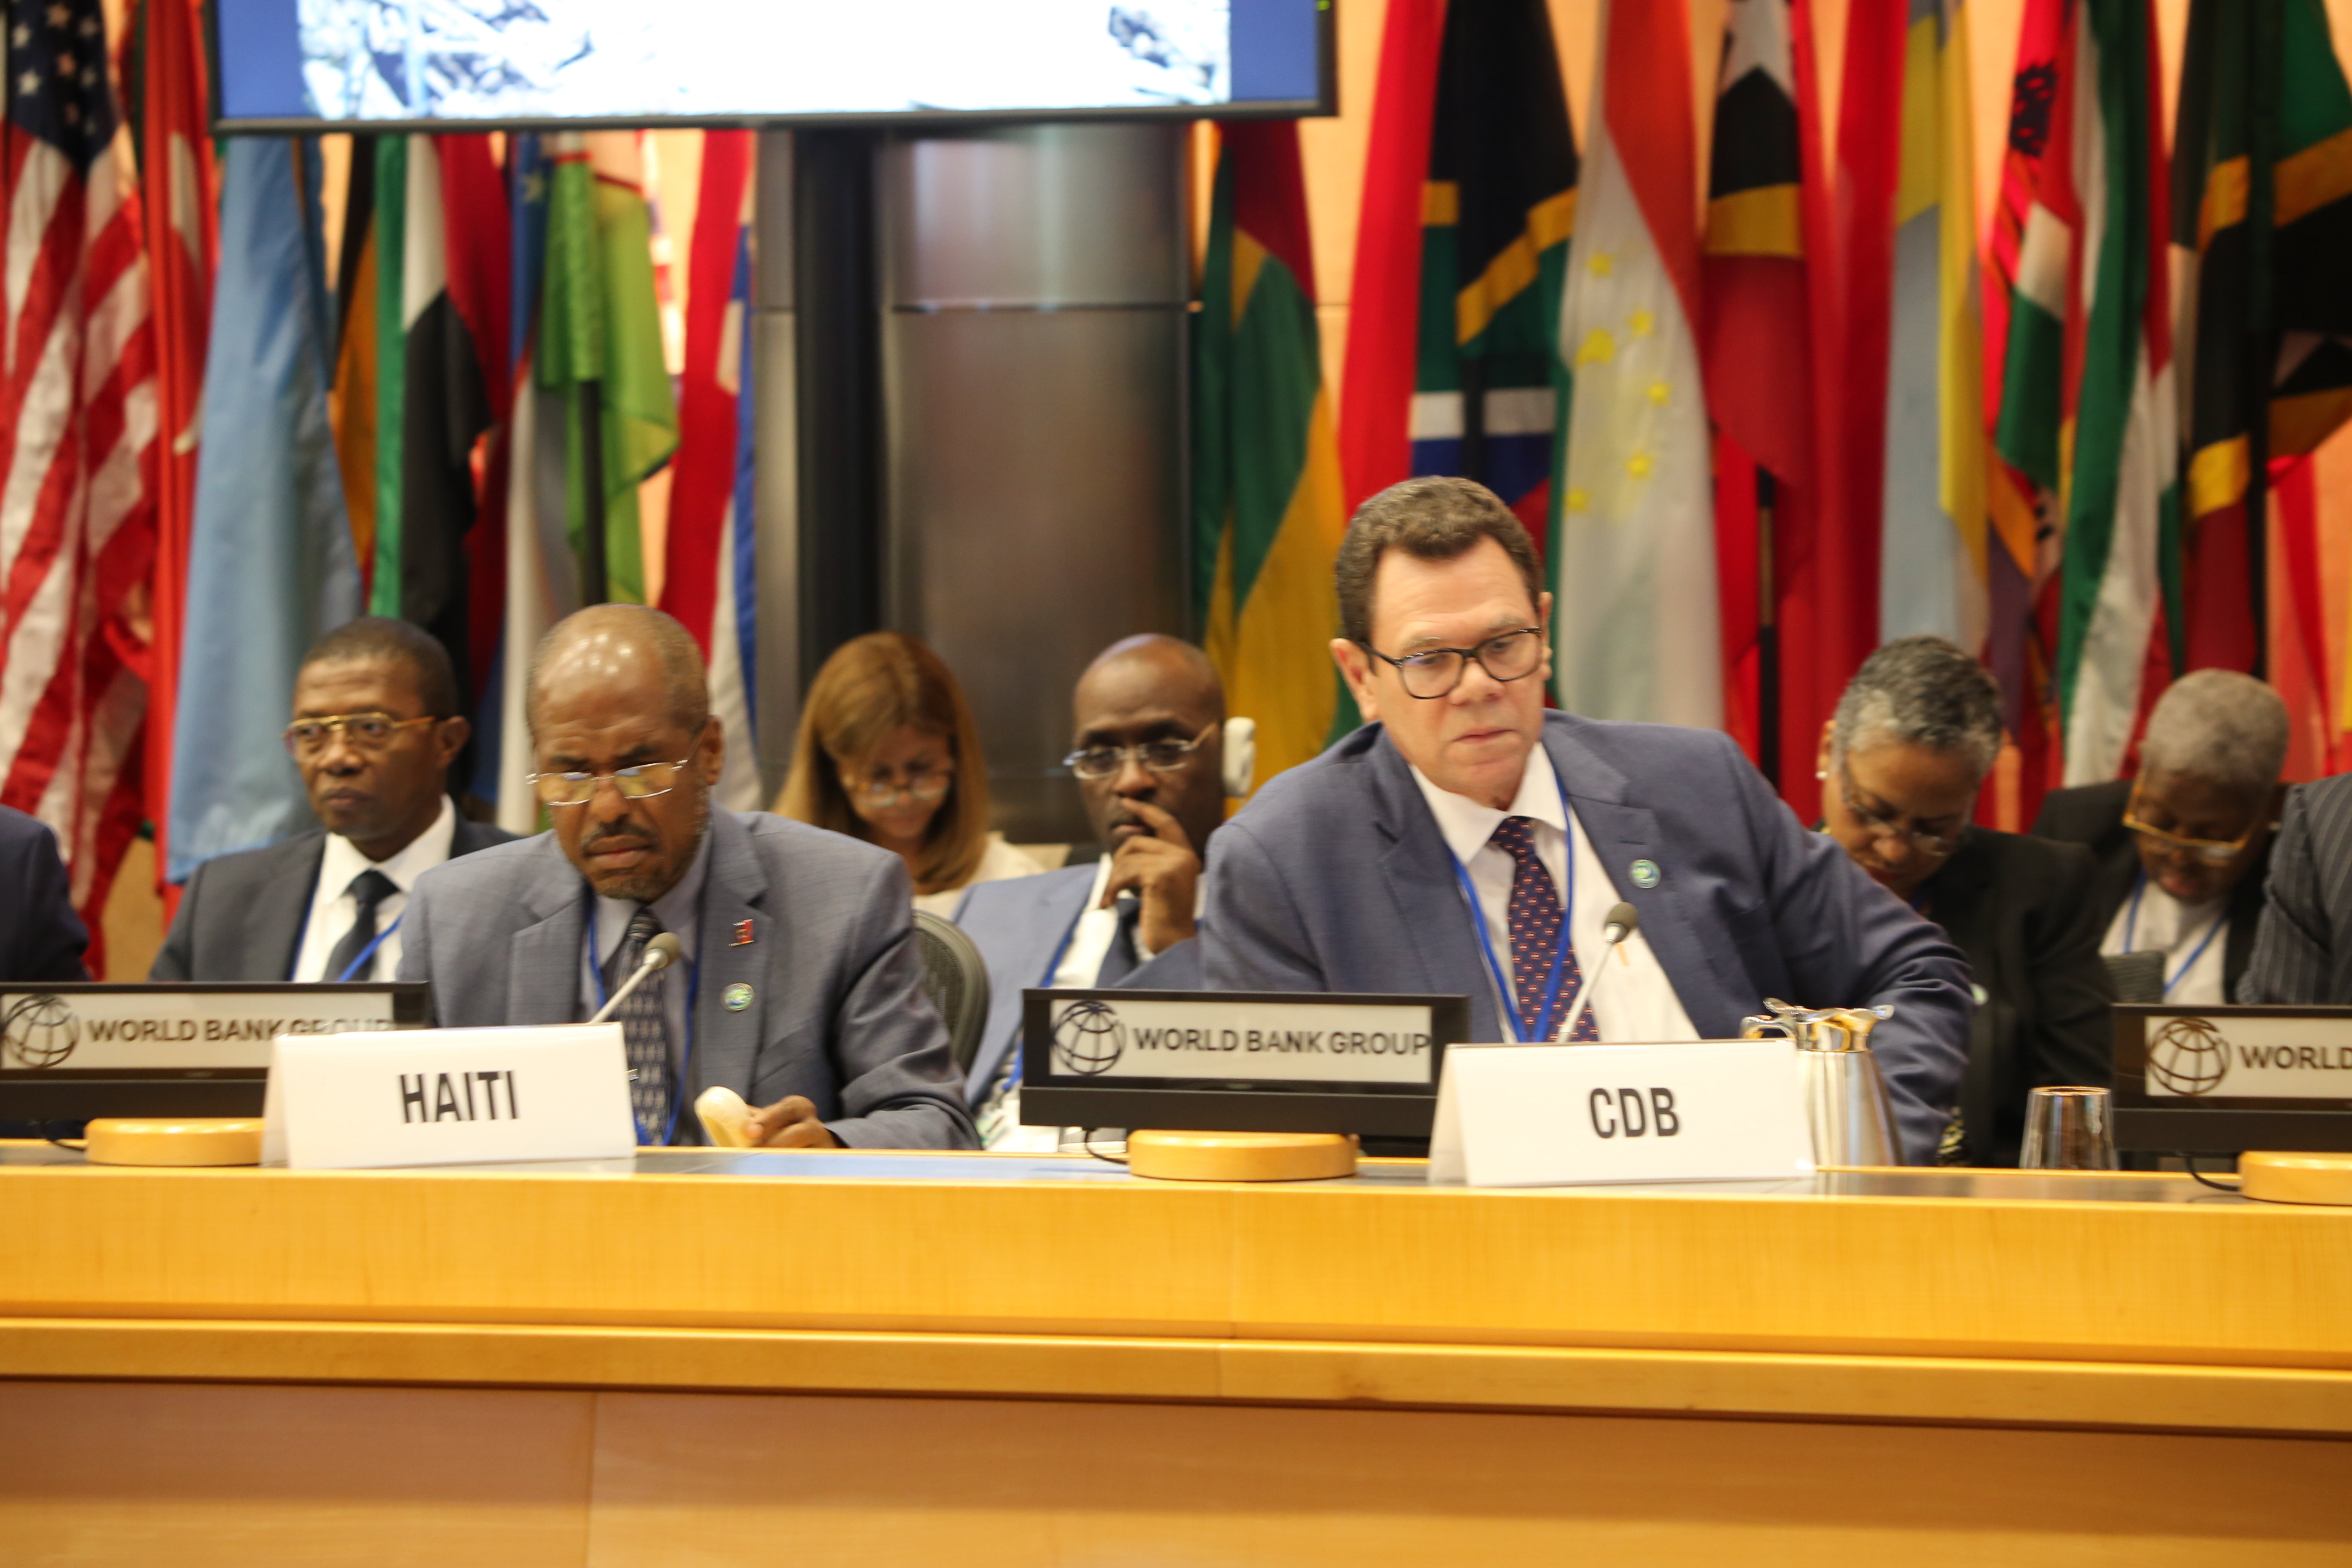 CDB President, Dr. Wm. Warren Smith (front row, 2nd on right), participates in the High-Level Meeting on Recovery and Resilience in the Caribbean on October 13 in Washington, D.C.